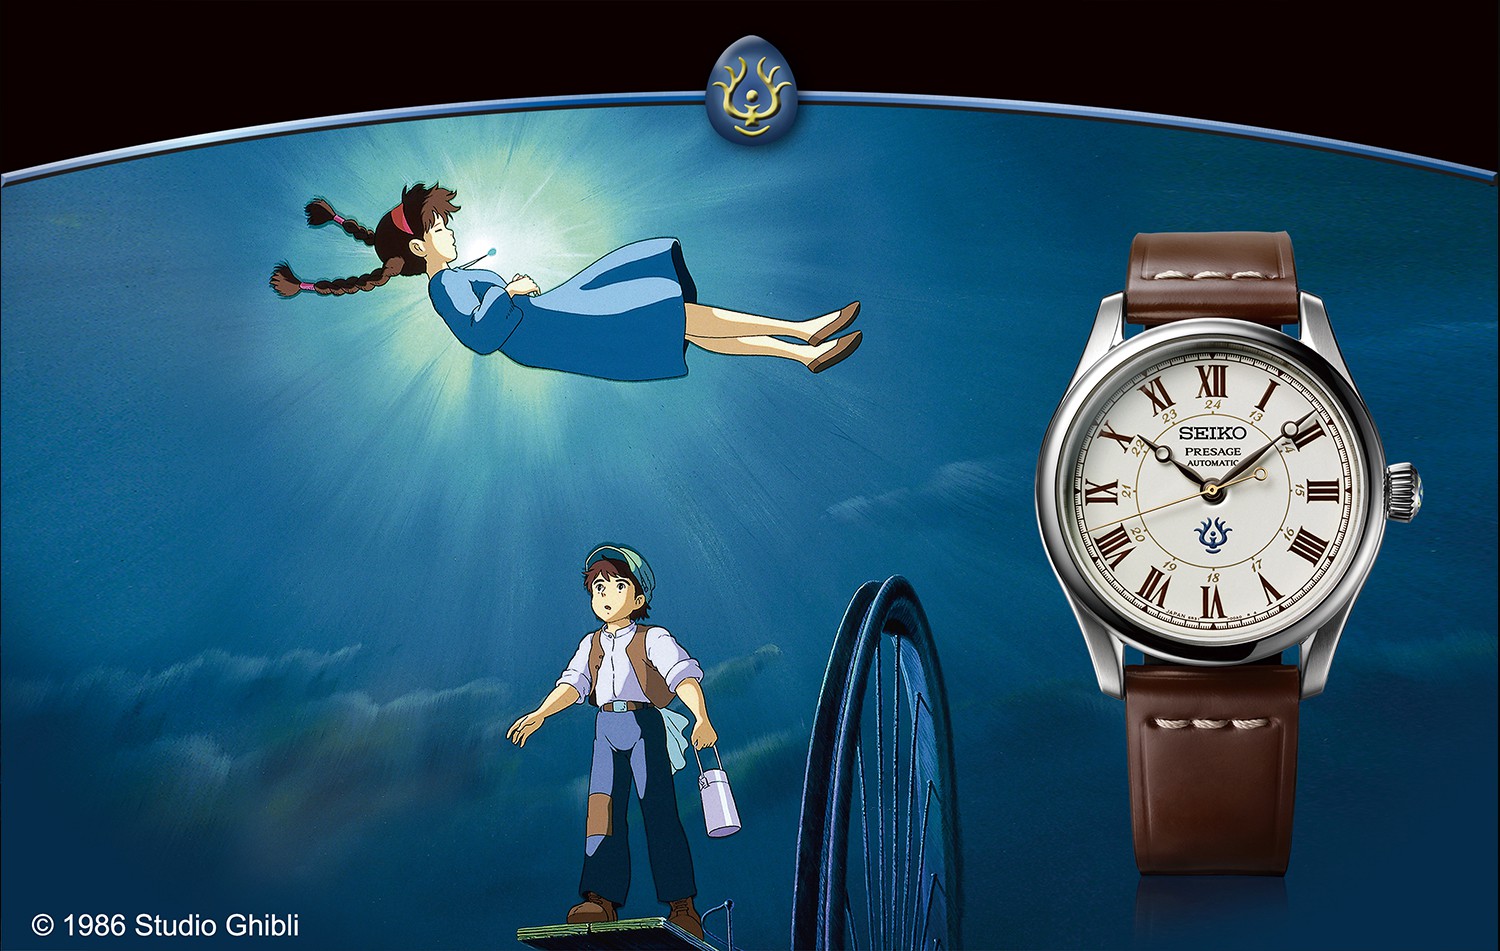 Fantasy made real. A new creation from Presage captures the nostalgia of a Japanese  animation masterwork. | Seiko Watch Corporation